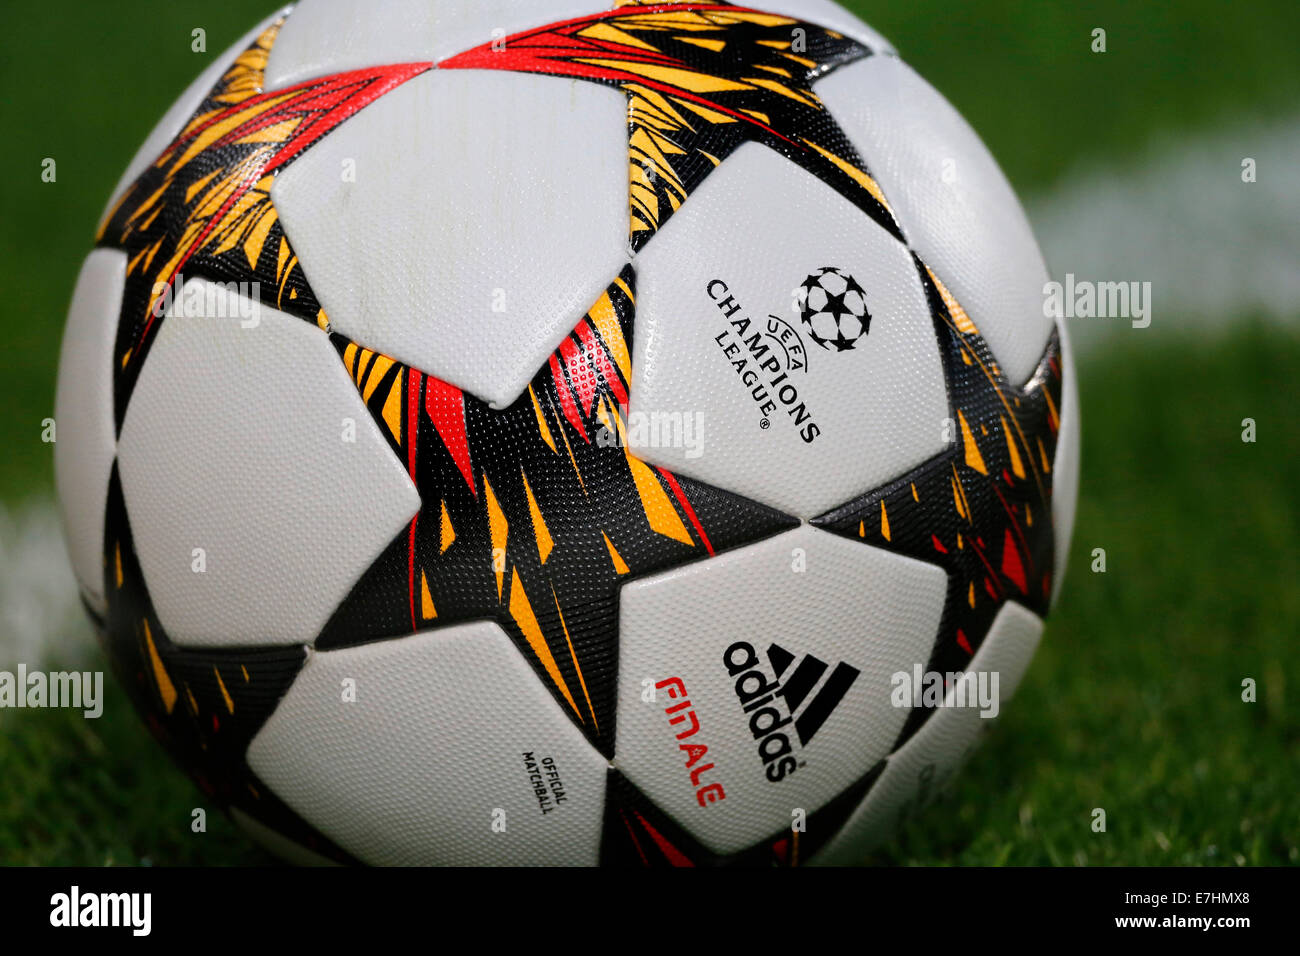 Adidas champions league ball in hi-res stock photography and images - Alamy